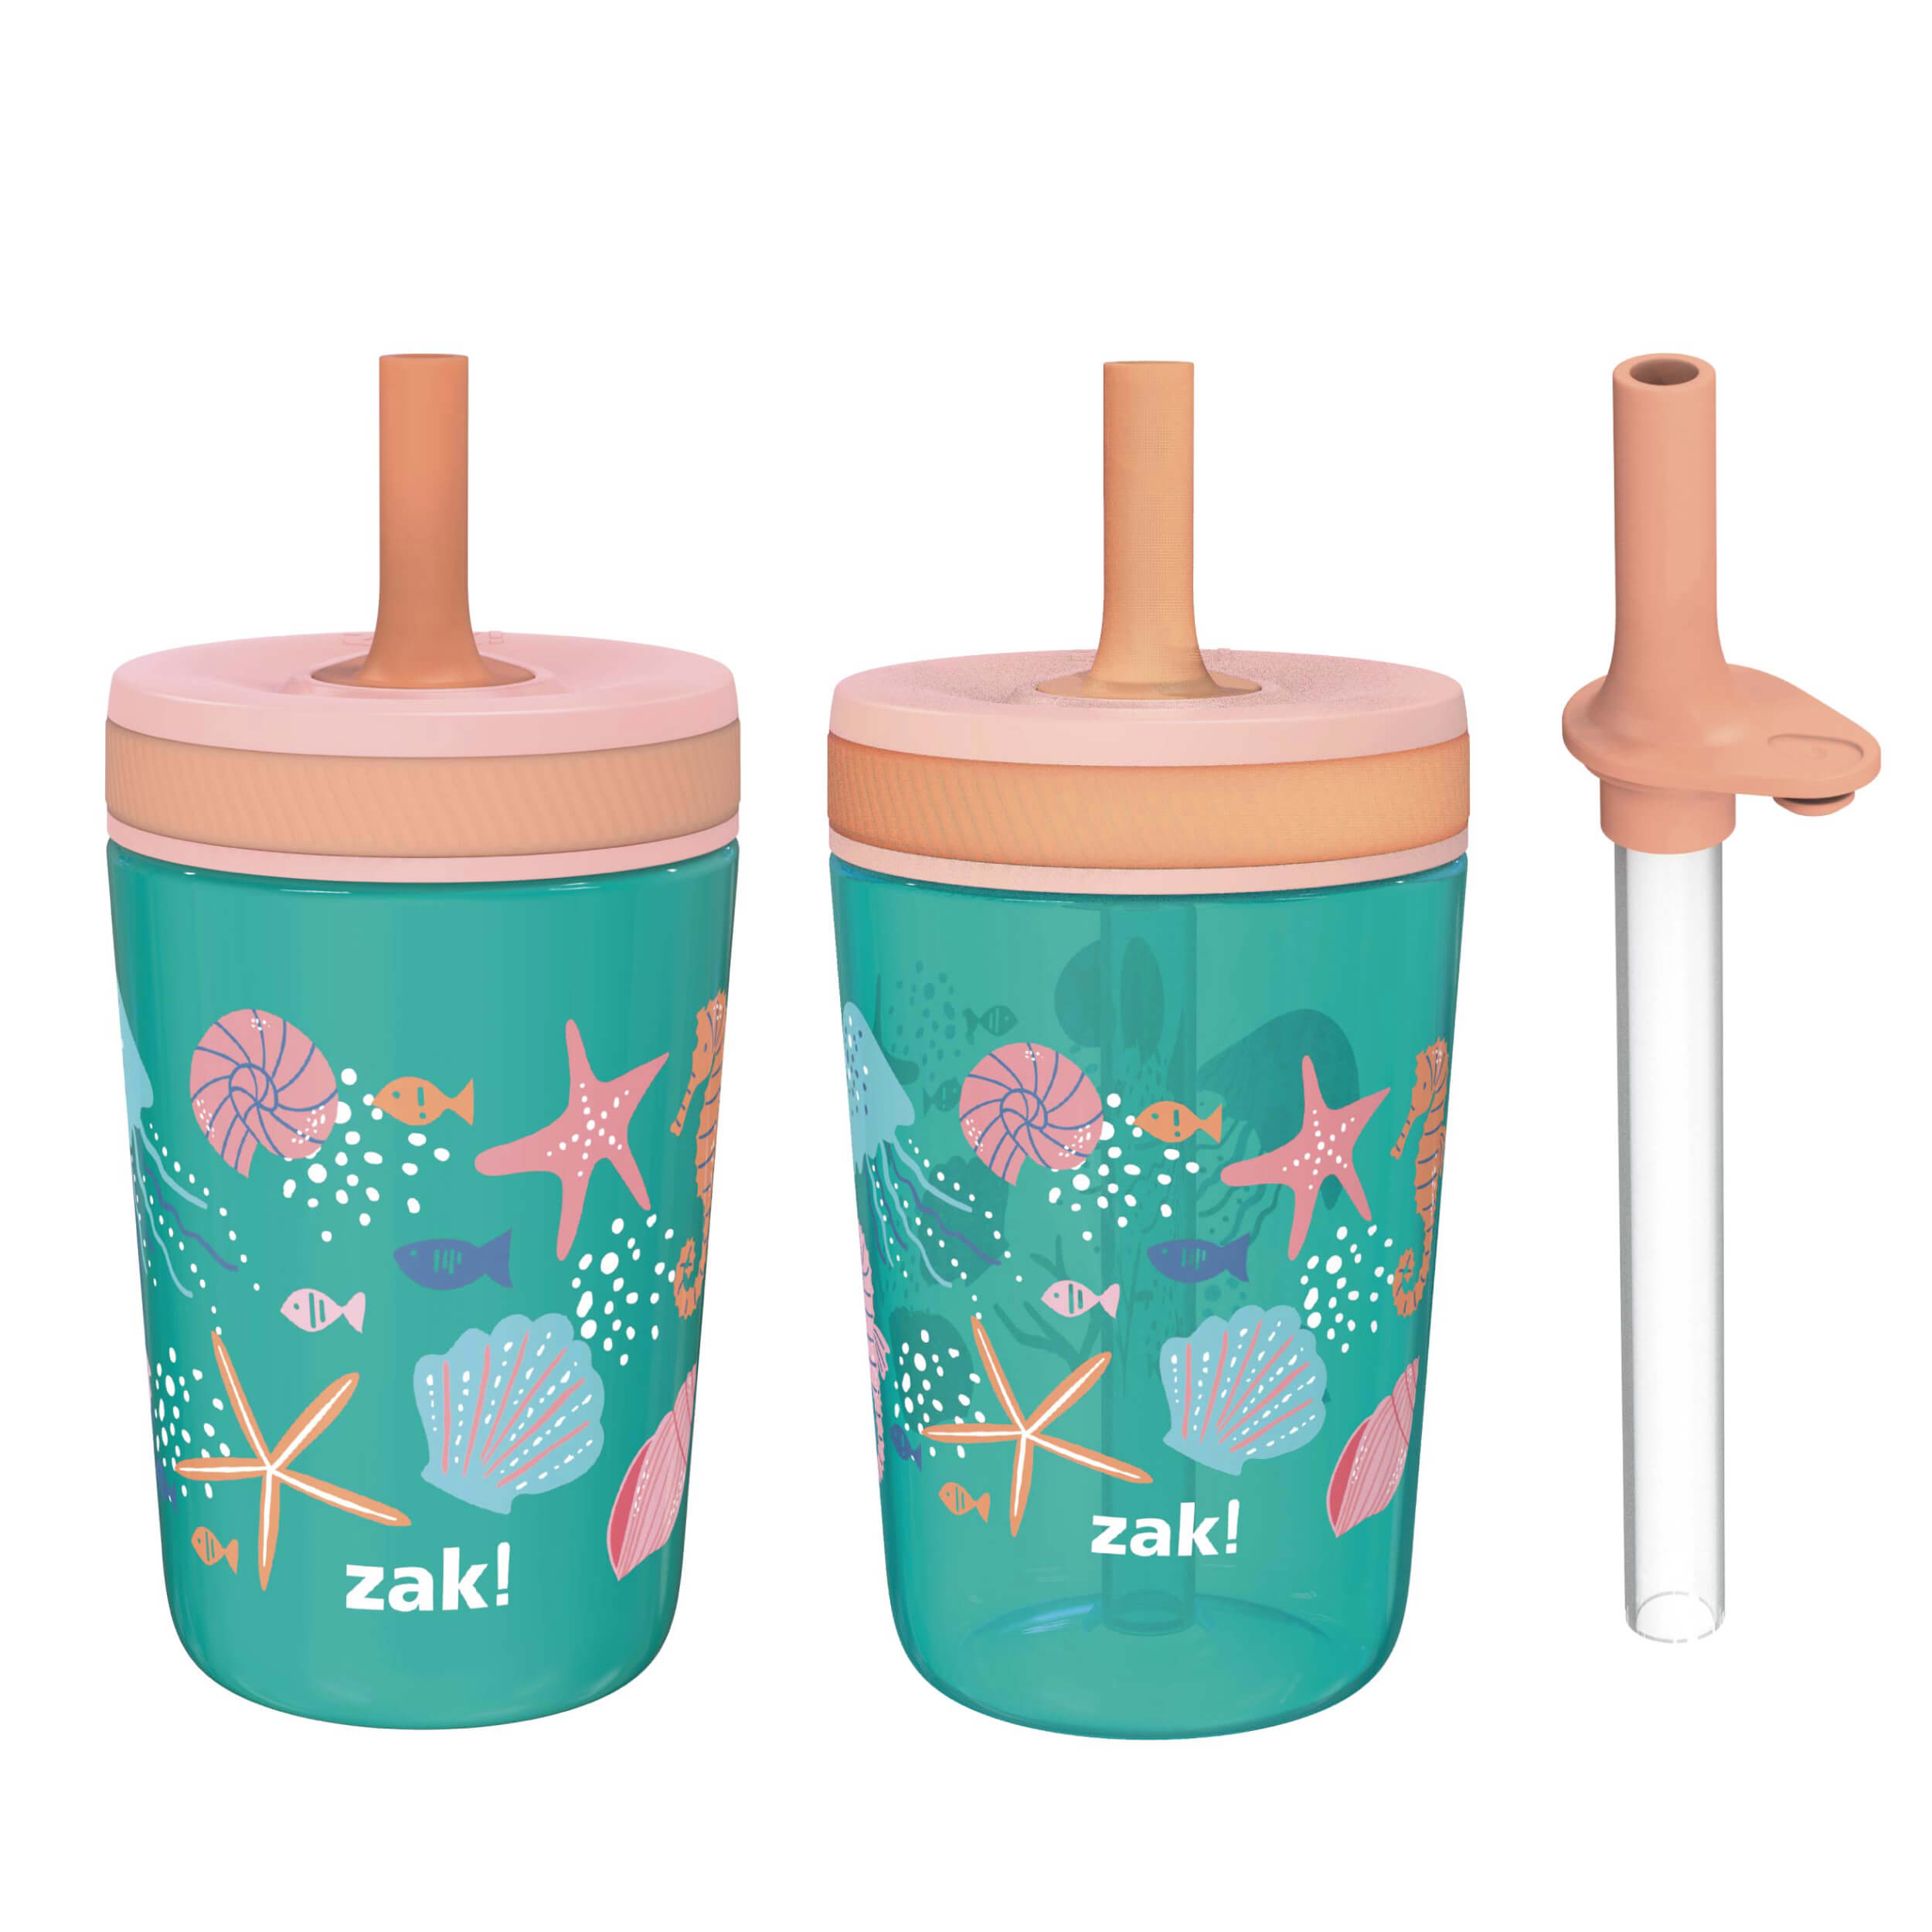 Kids Cups with Straw and Lid Spill Proof, 5 Pack 12oz Stainless